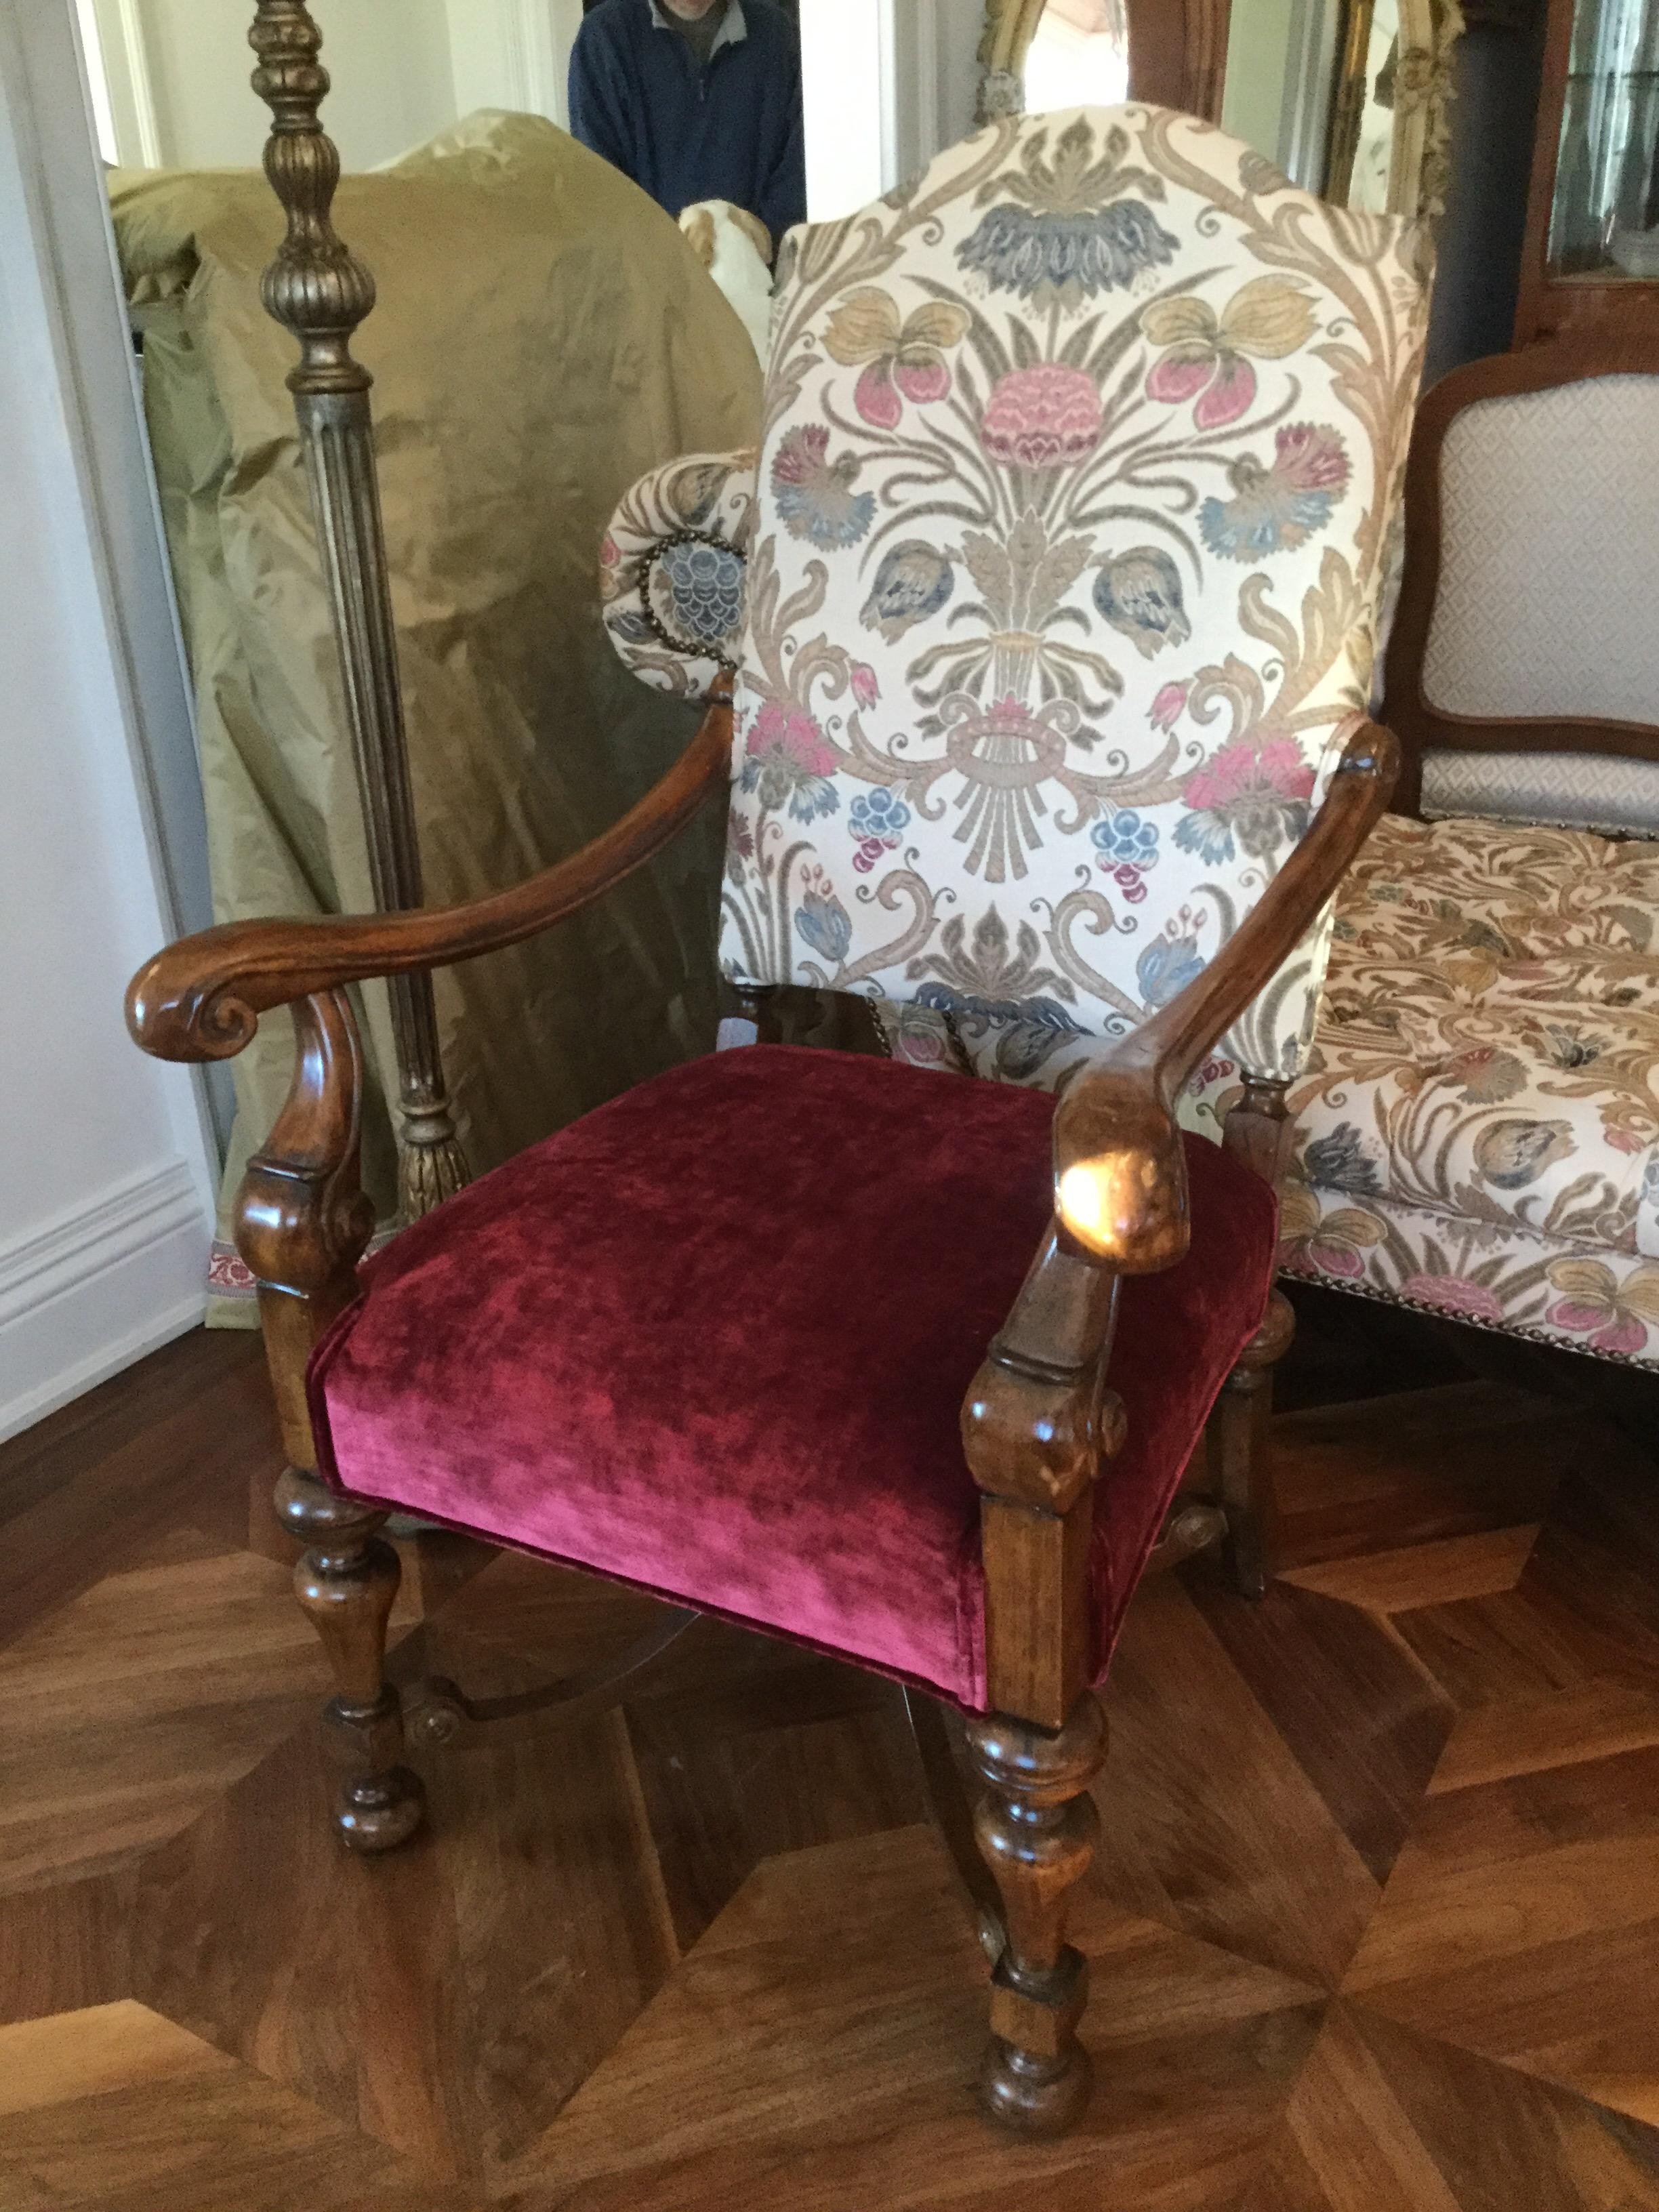 Elegantly carved wood frame featuring Renaissance-style legs, elongated sweeping arms, and a cross-stretcher for stability. This high-back chair is upholstered in a rich burgundy velvet seat and a patterned back in shades of pink, blue and beige.